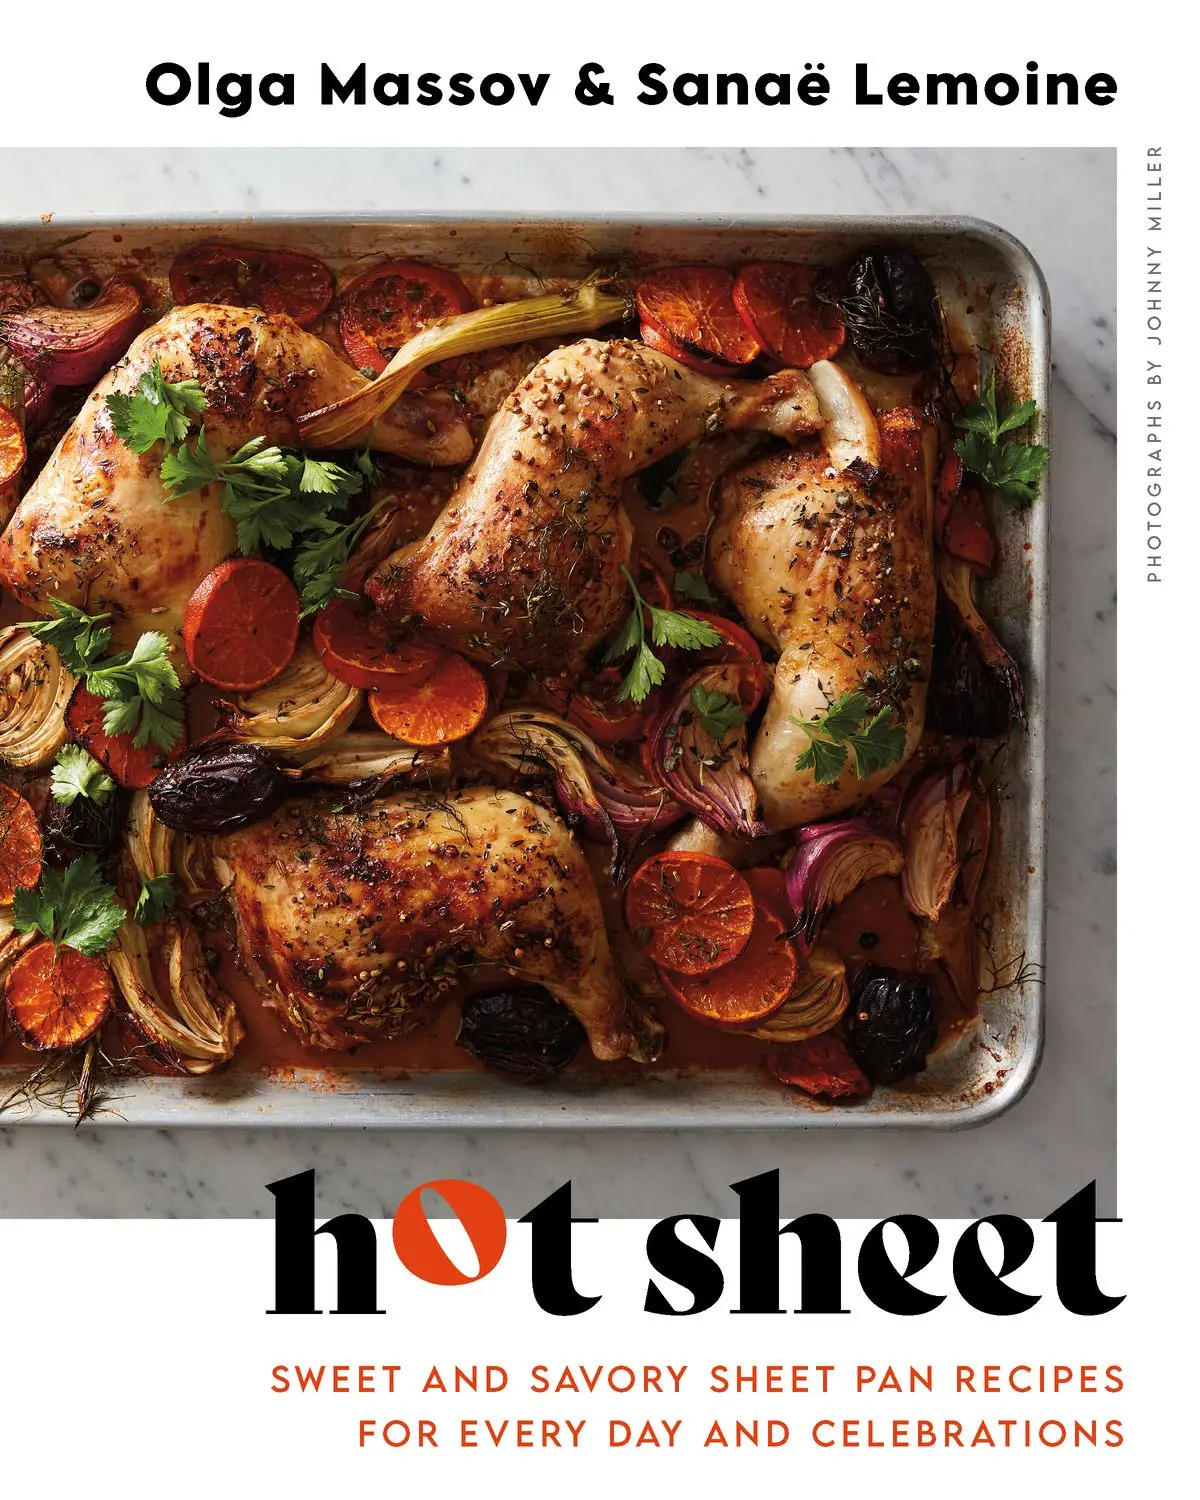 The cover of Hot Sheet